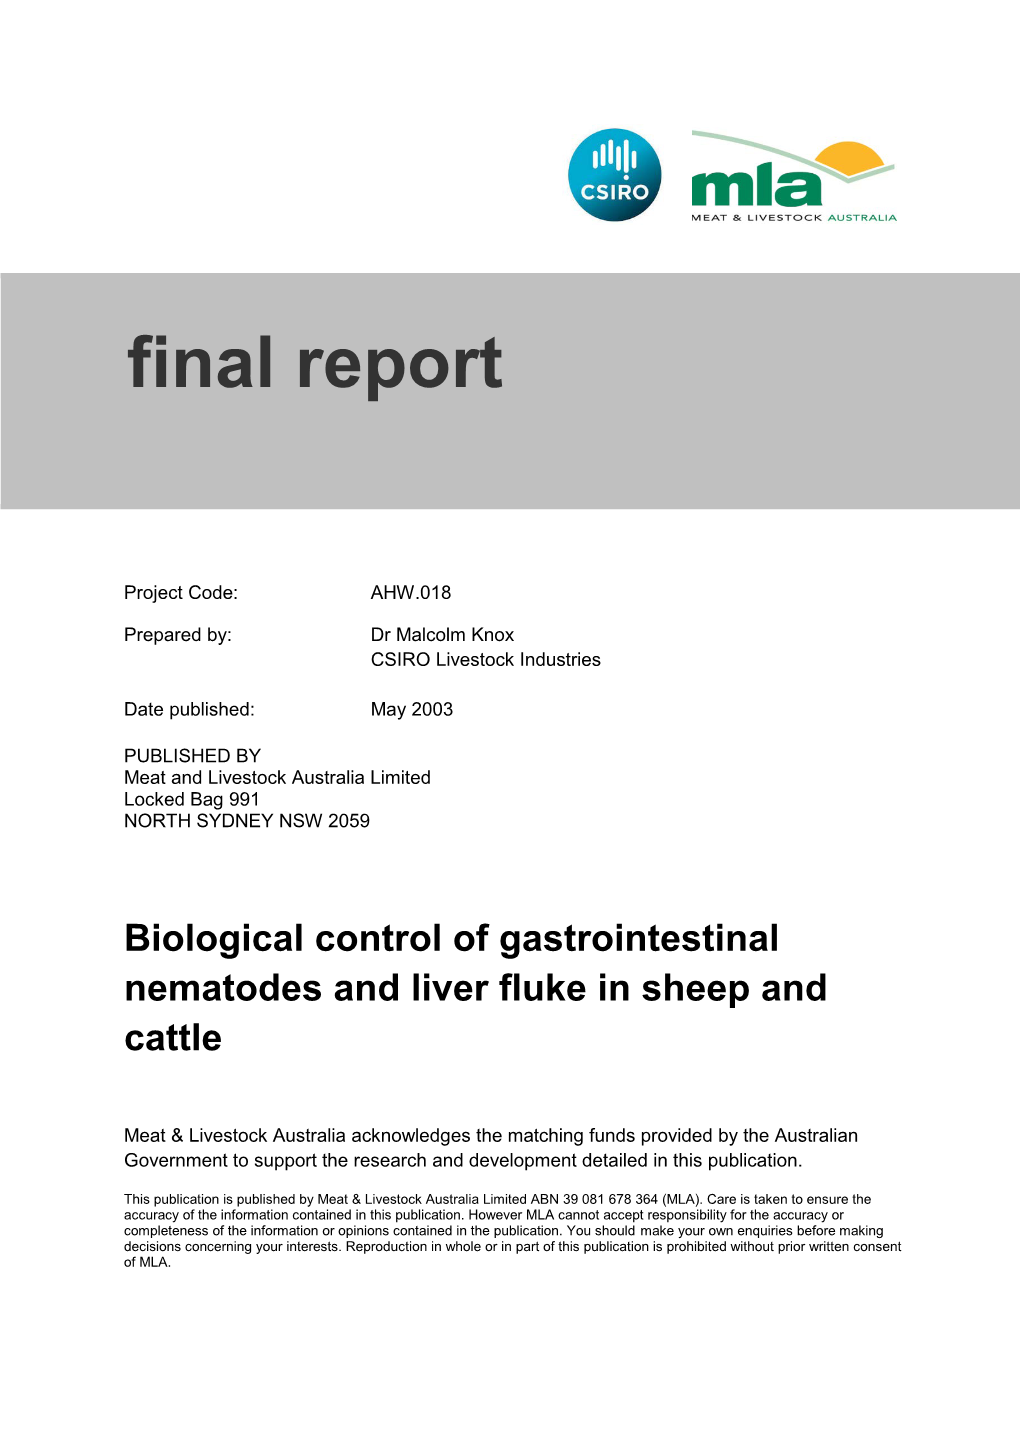 Biological Control of Gastrointestinal Nematodes and Liver Fluke in Sheep and Cattle